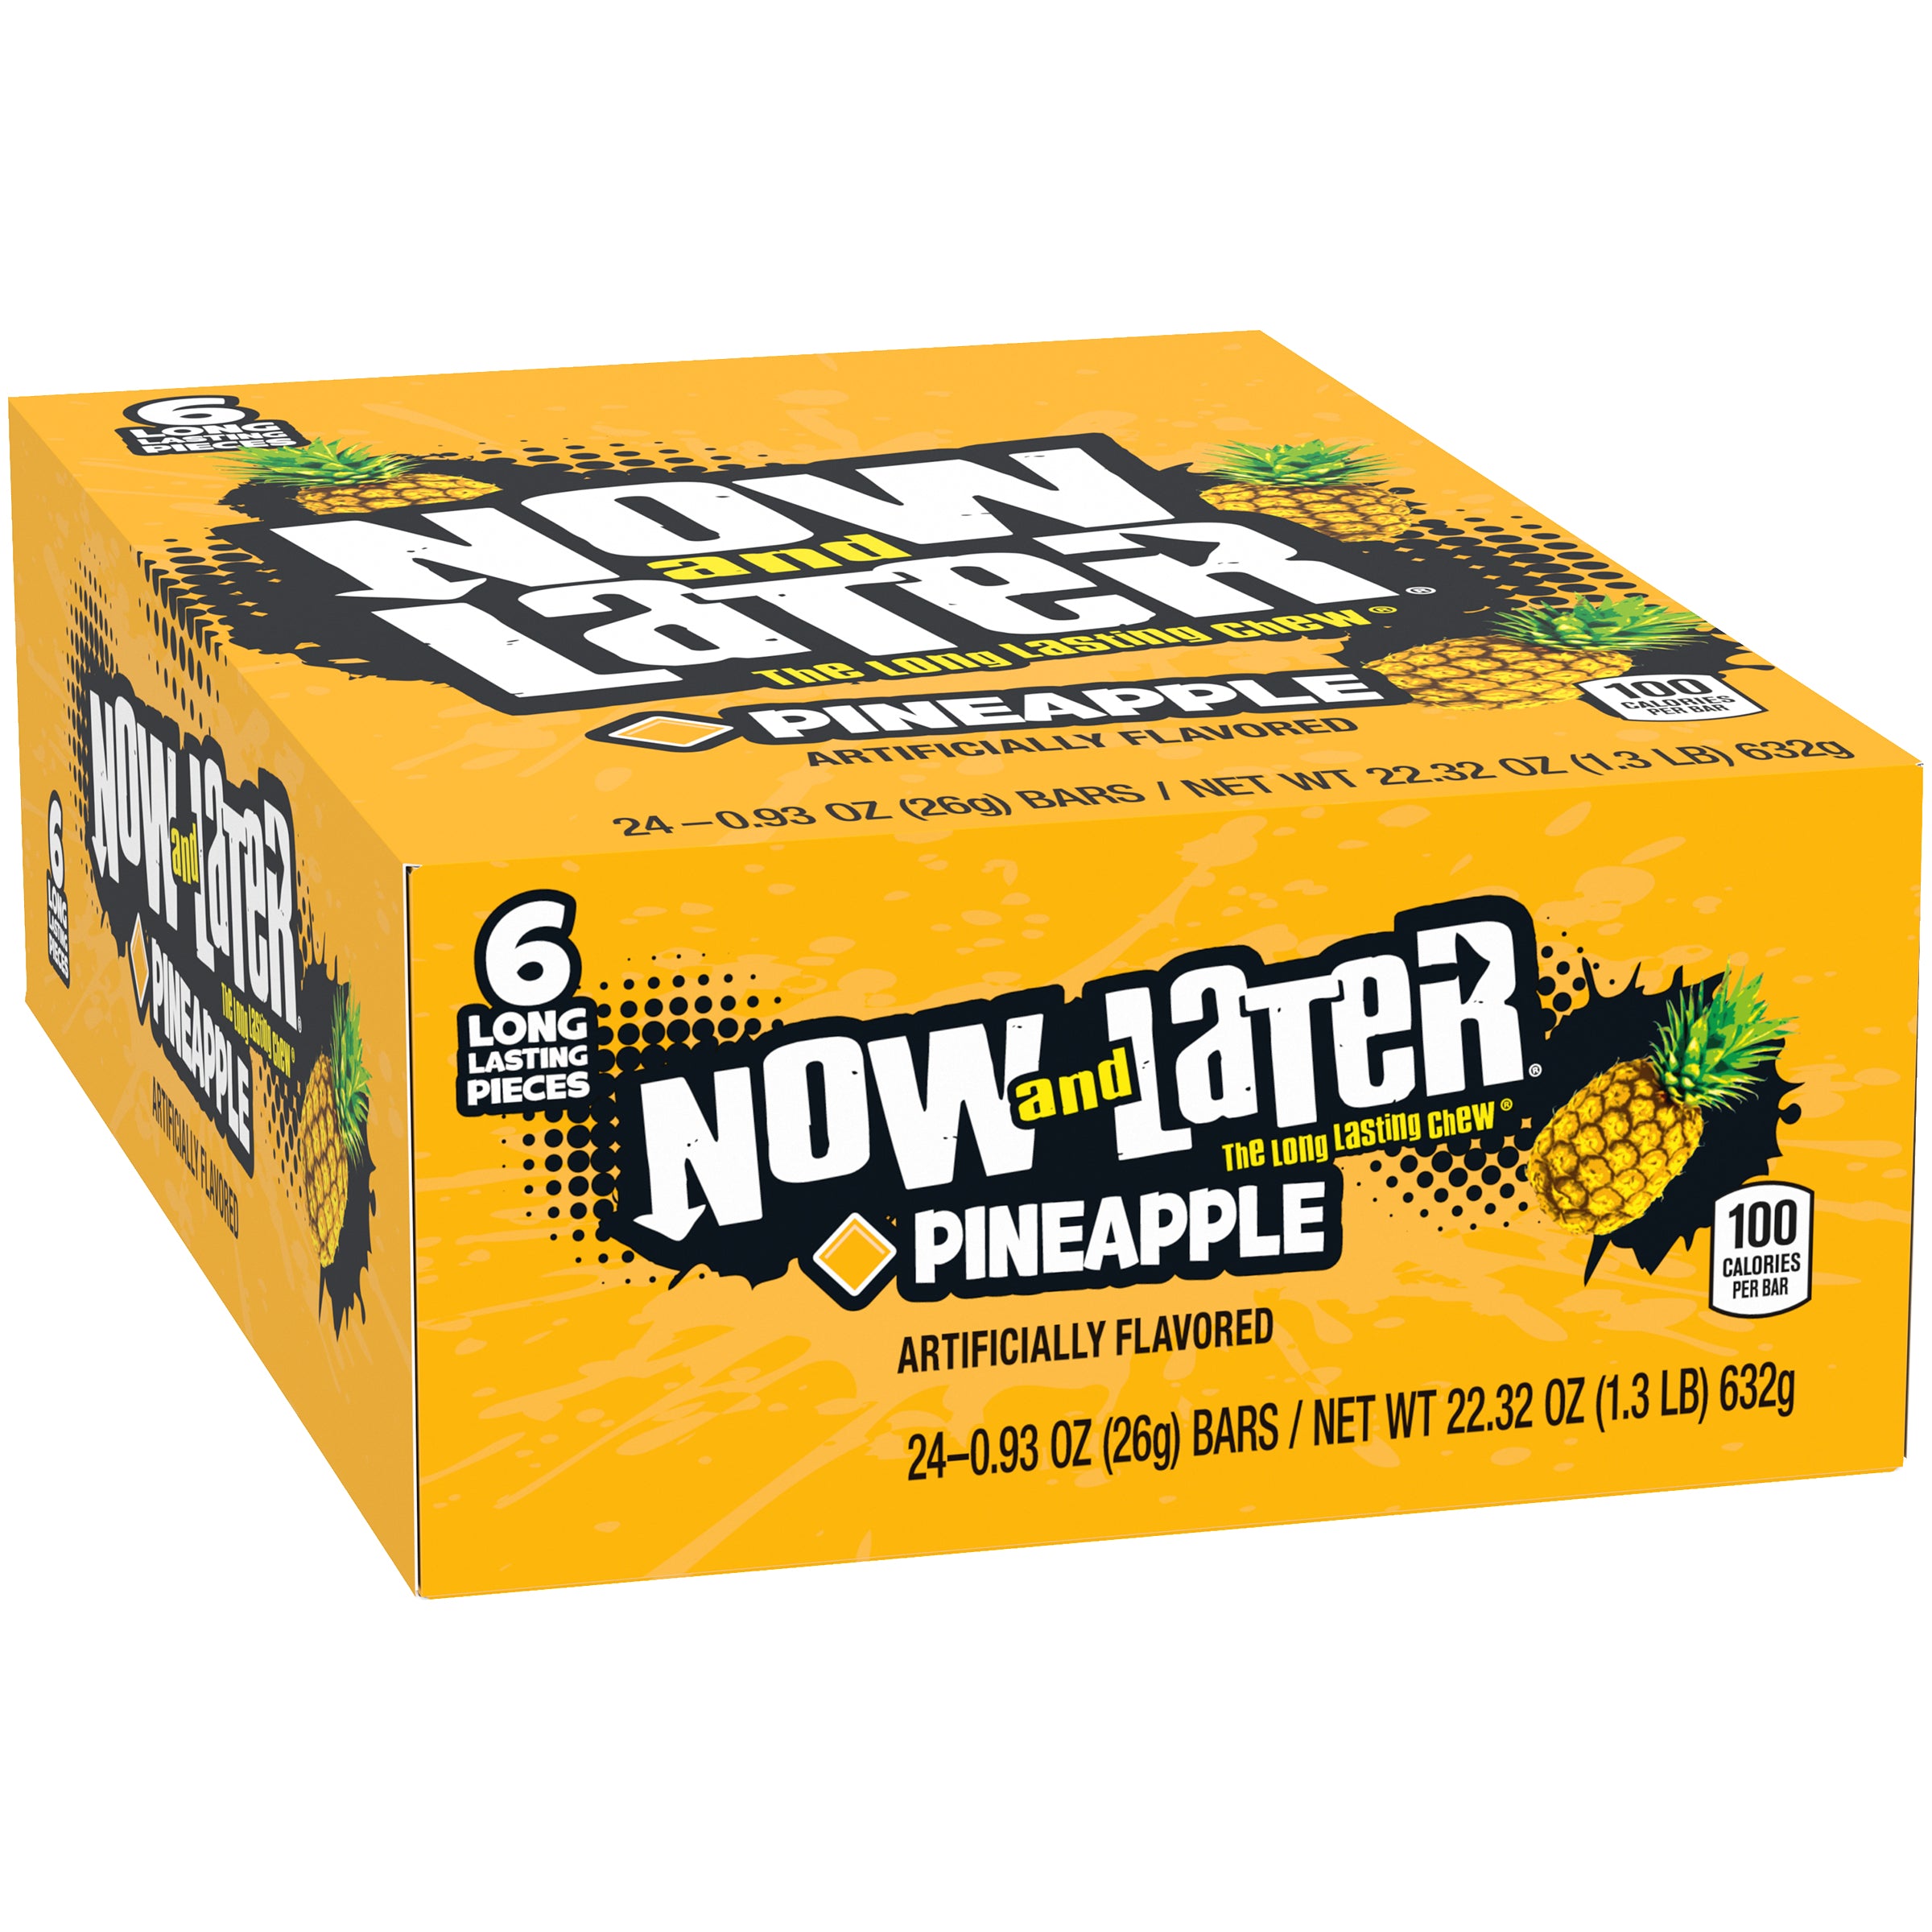 NOW AND LATER - PINEAPPLE